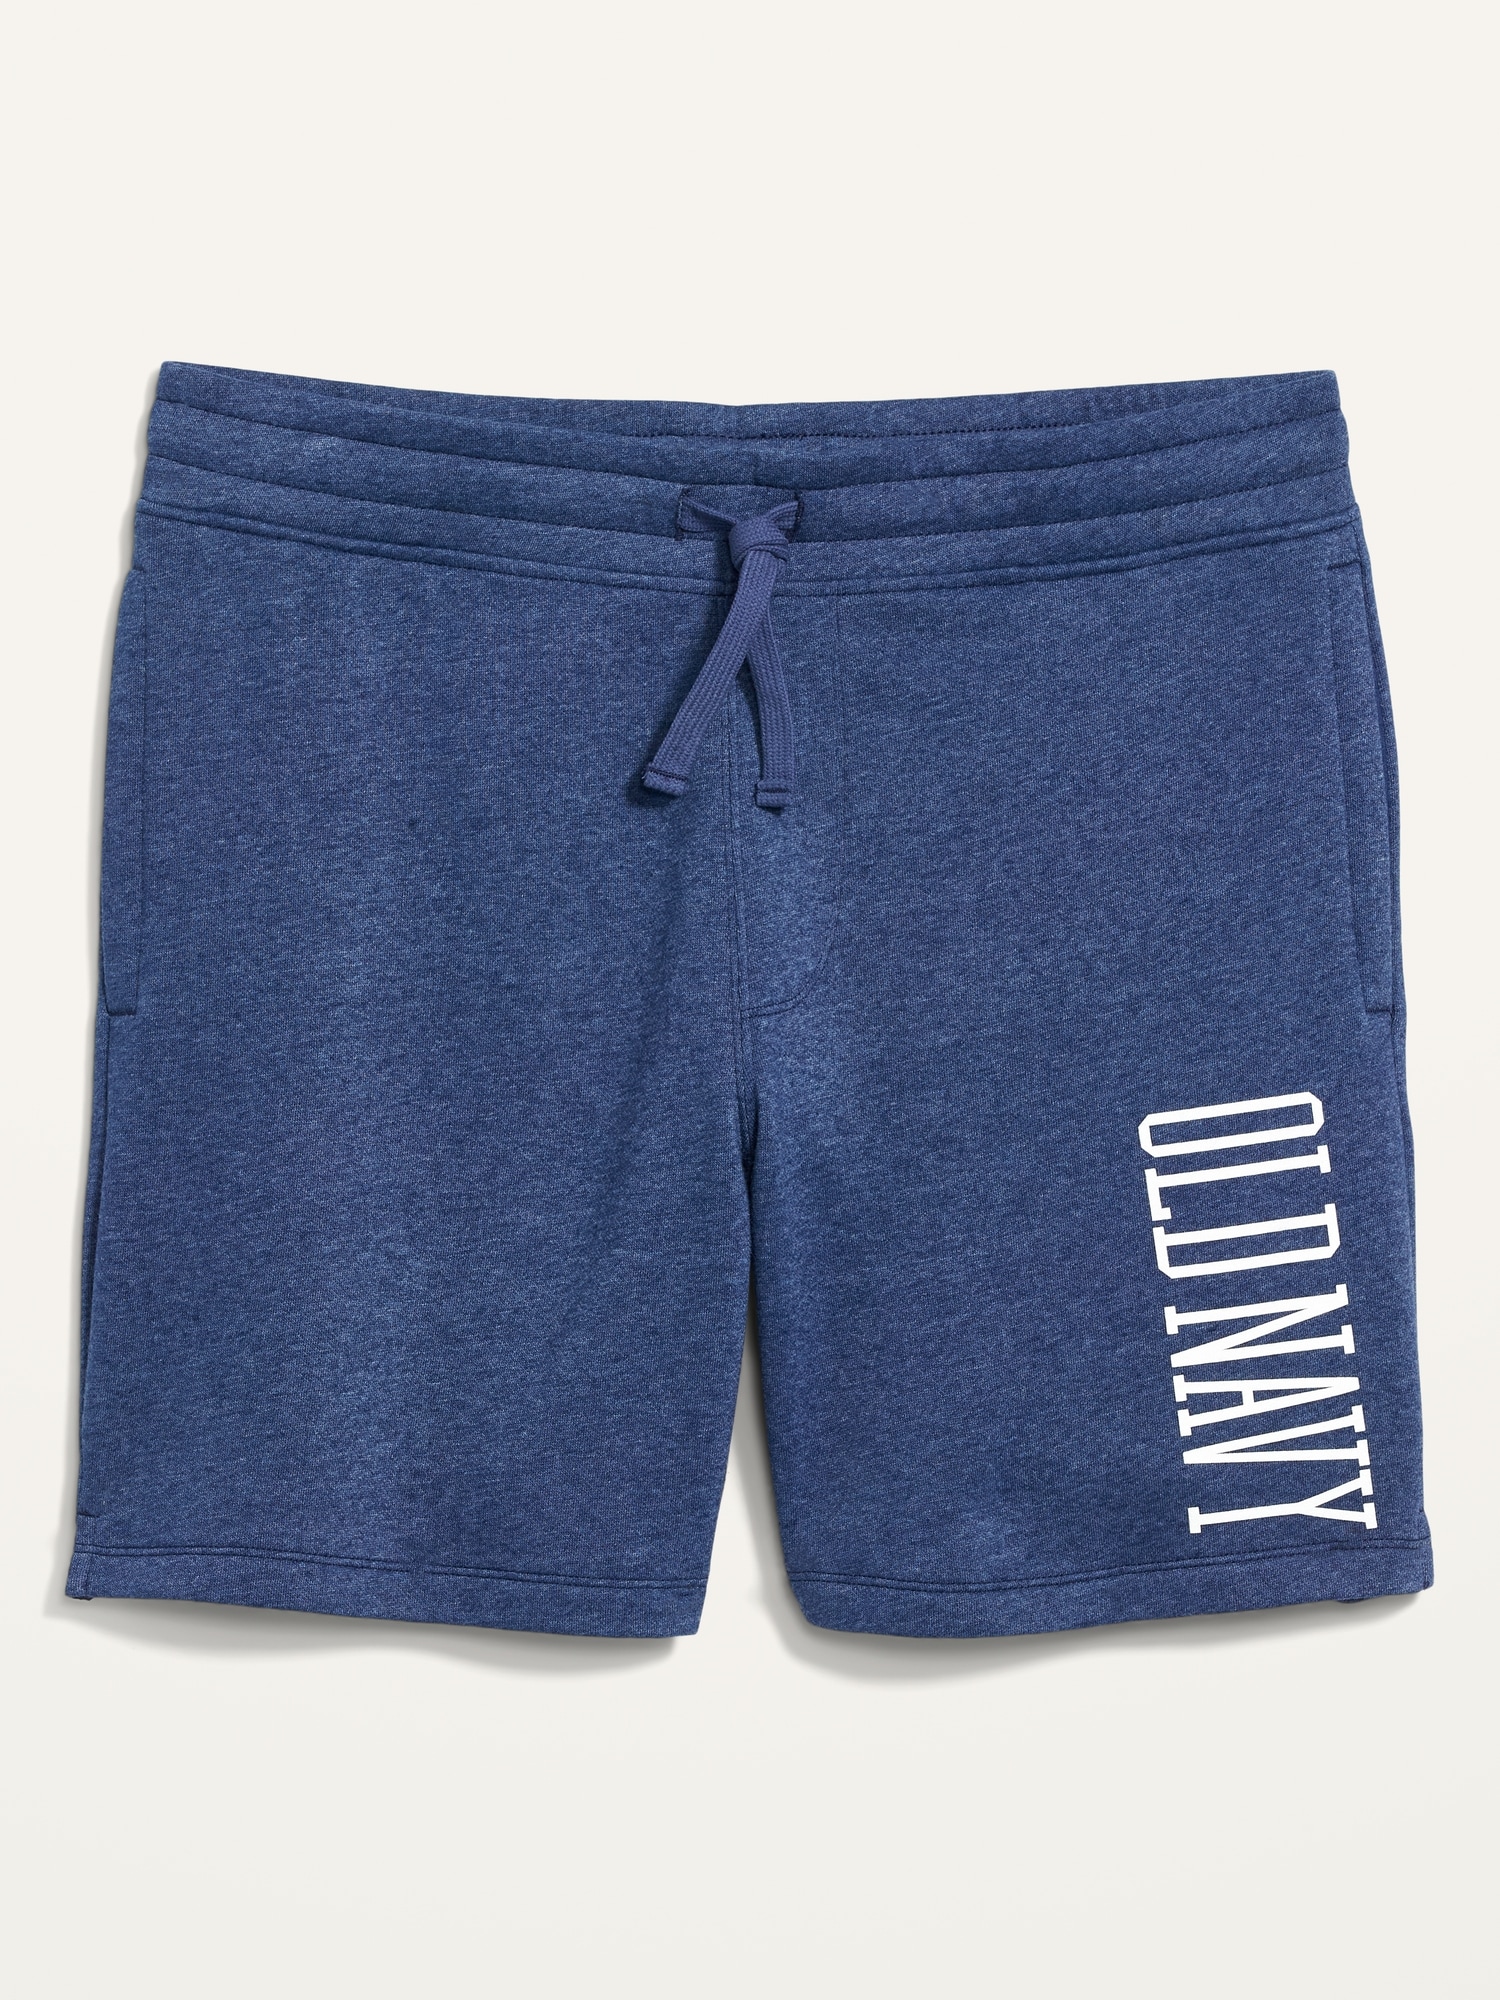 Logo-Graphic Sweat Shorts for Men -- 7-inch inseam | Old Navy